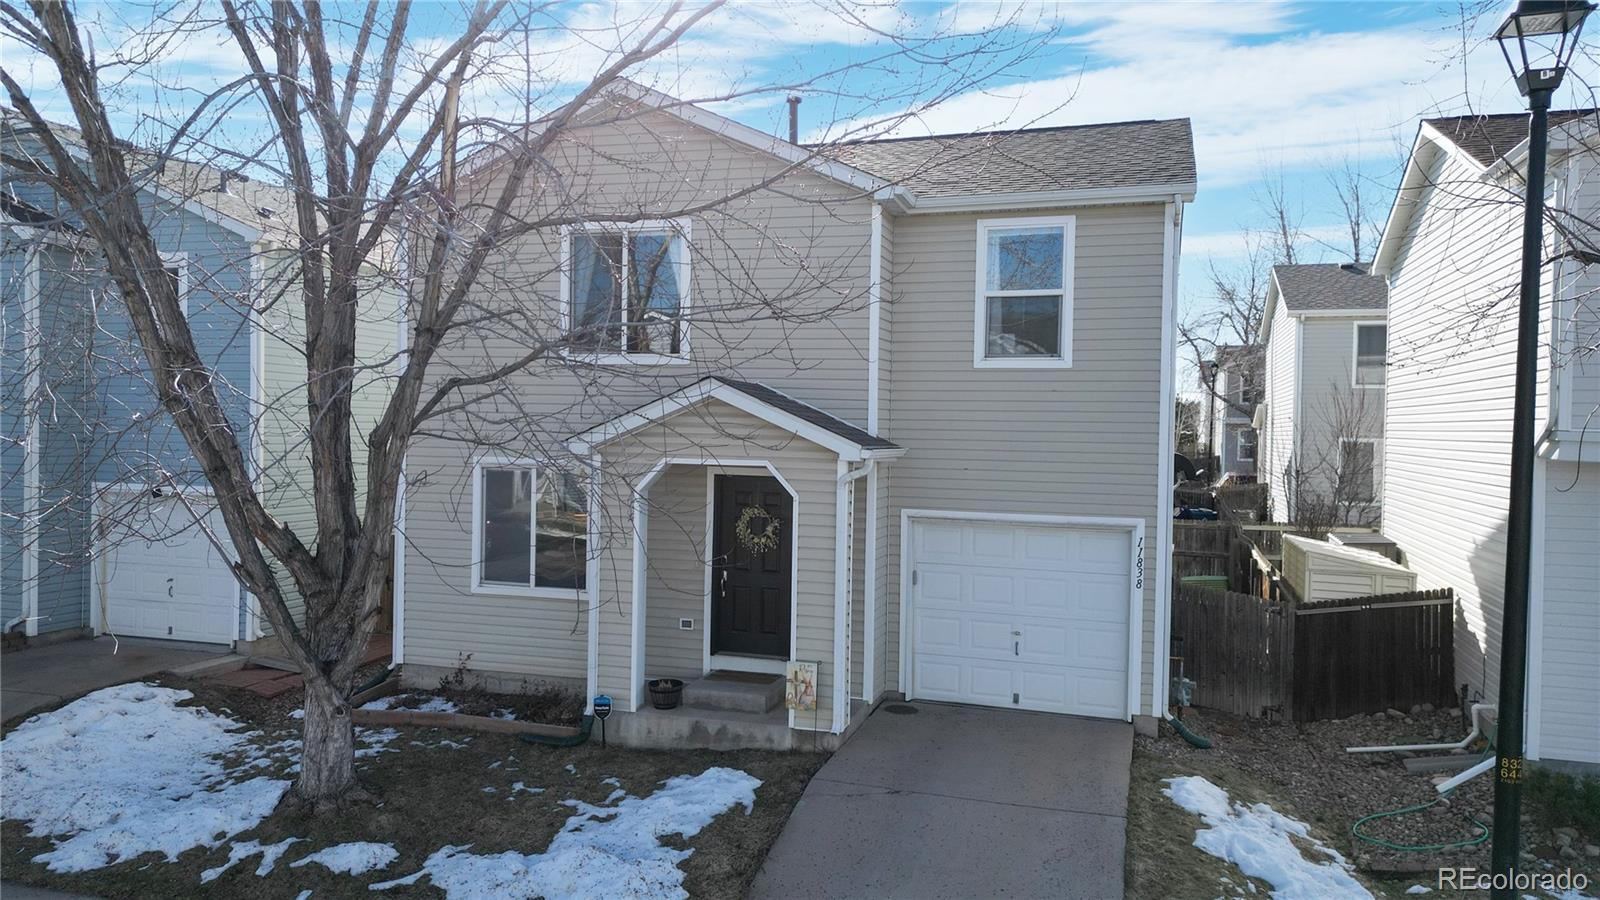 Report Image for 11838 W Tufts Place,Morrison, Colorado